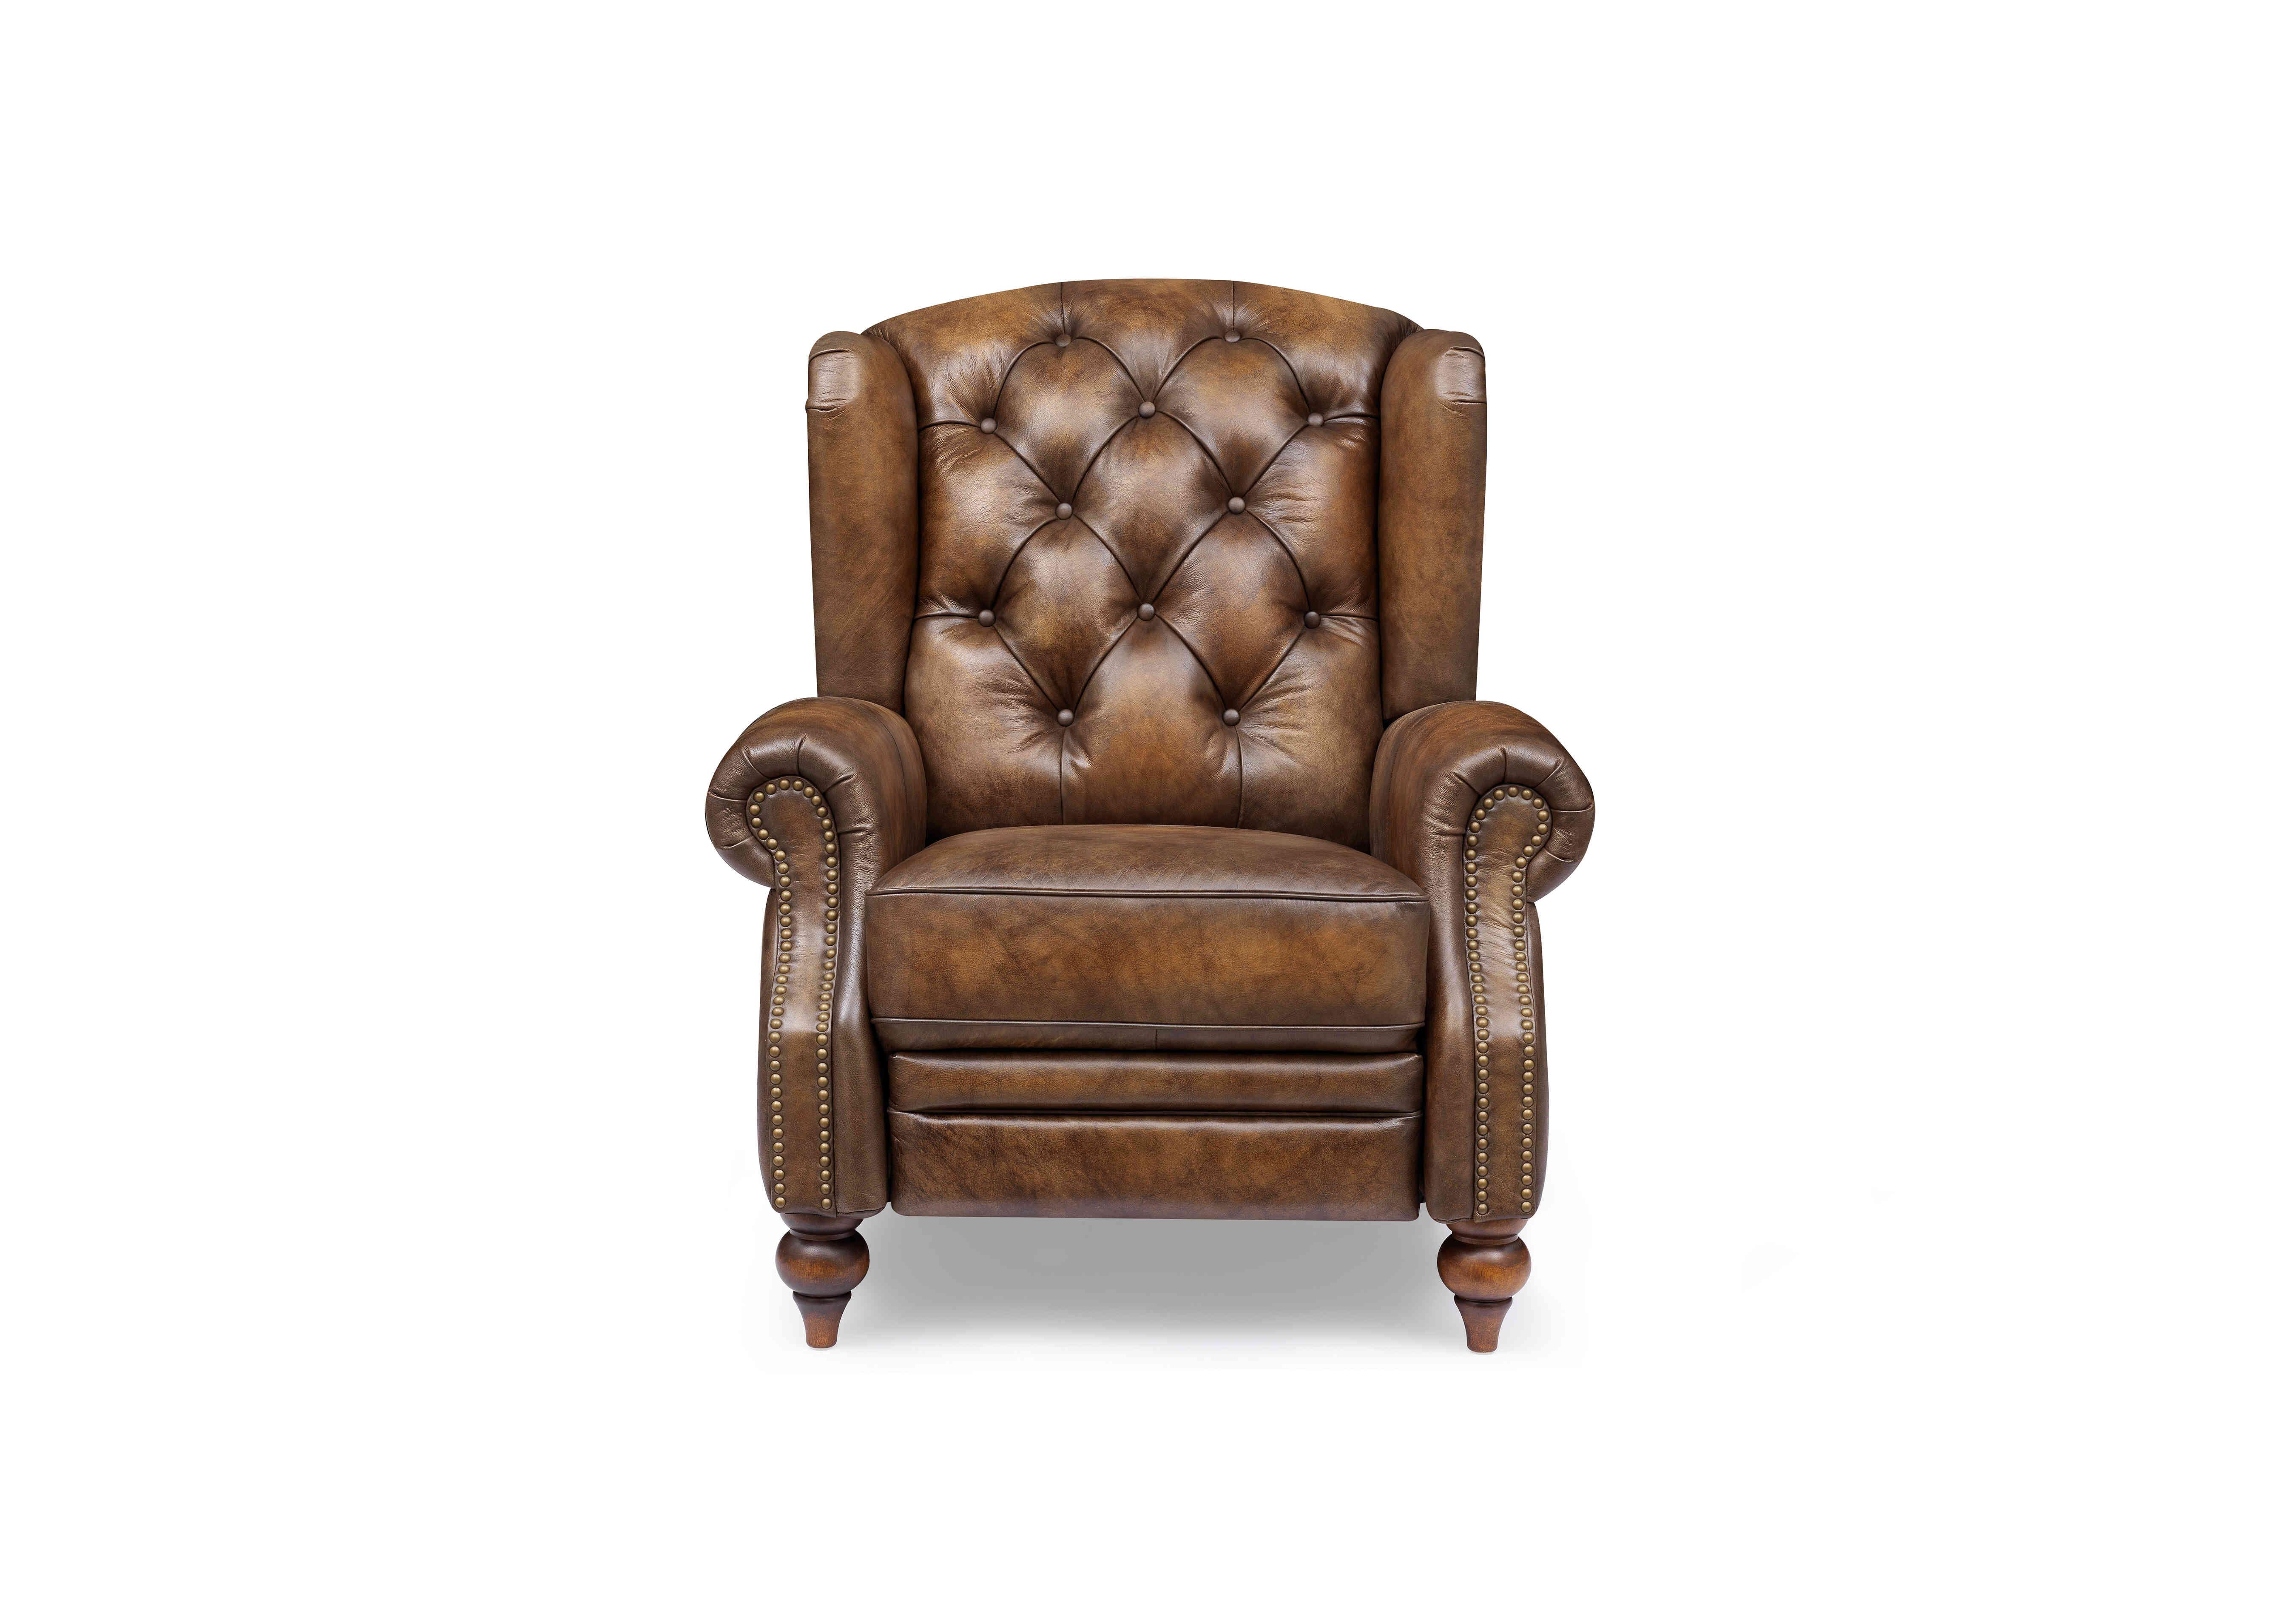 Shackleton Leather Wing Chair in X3y1-1981ls Saddle on Furniture Village